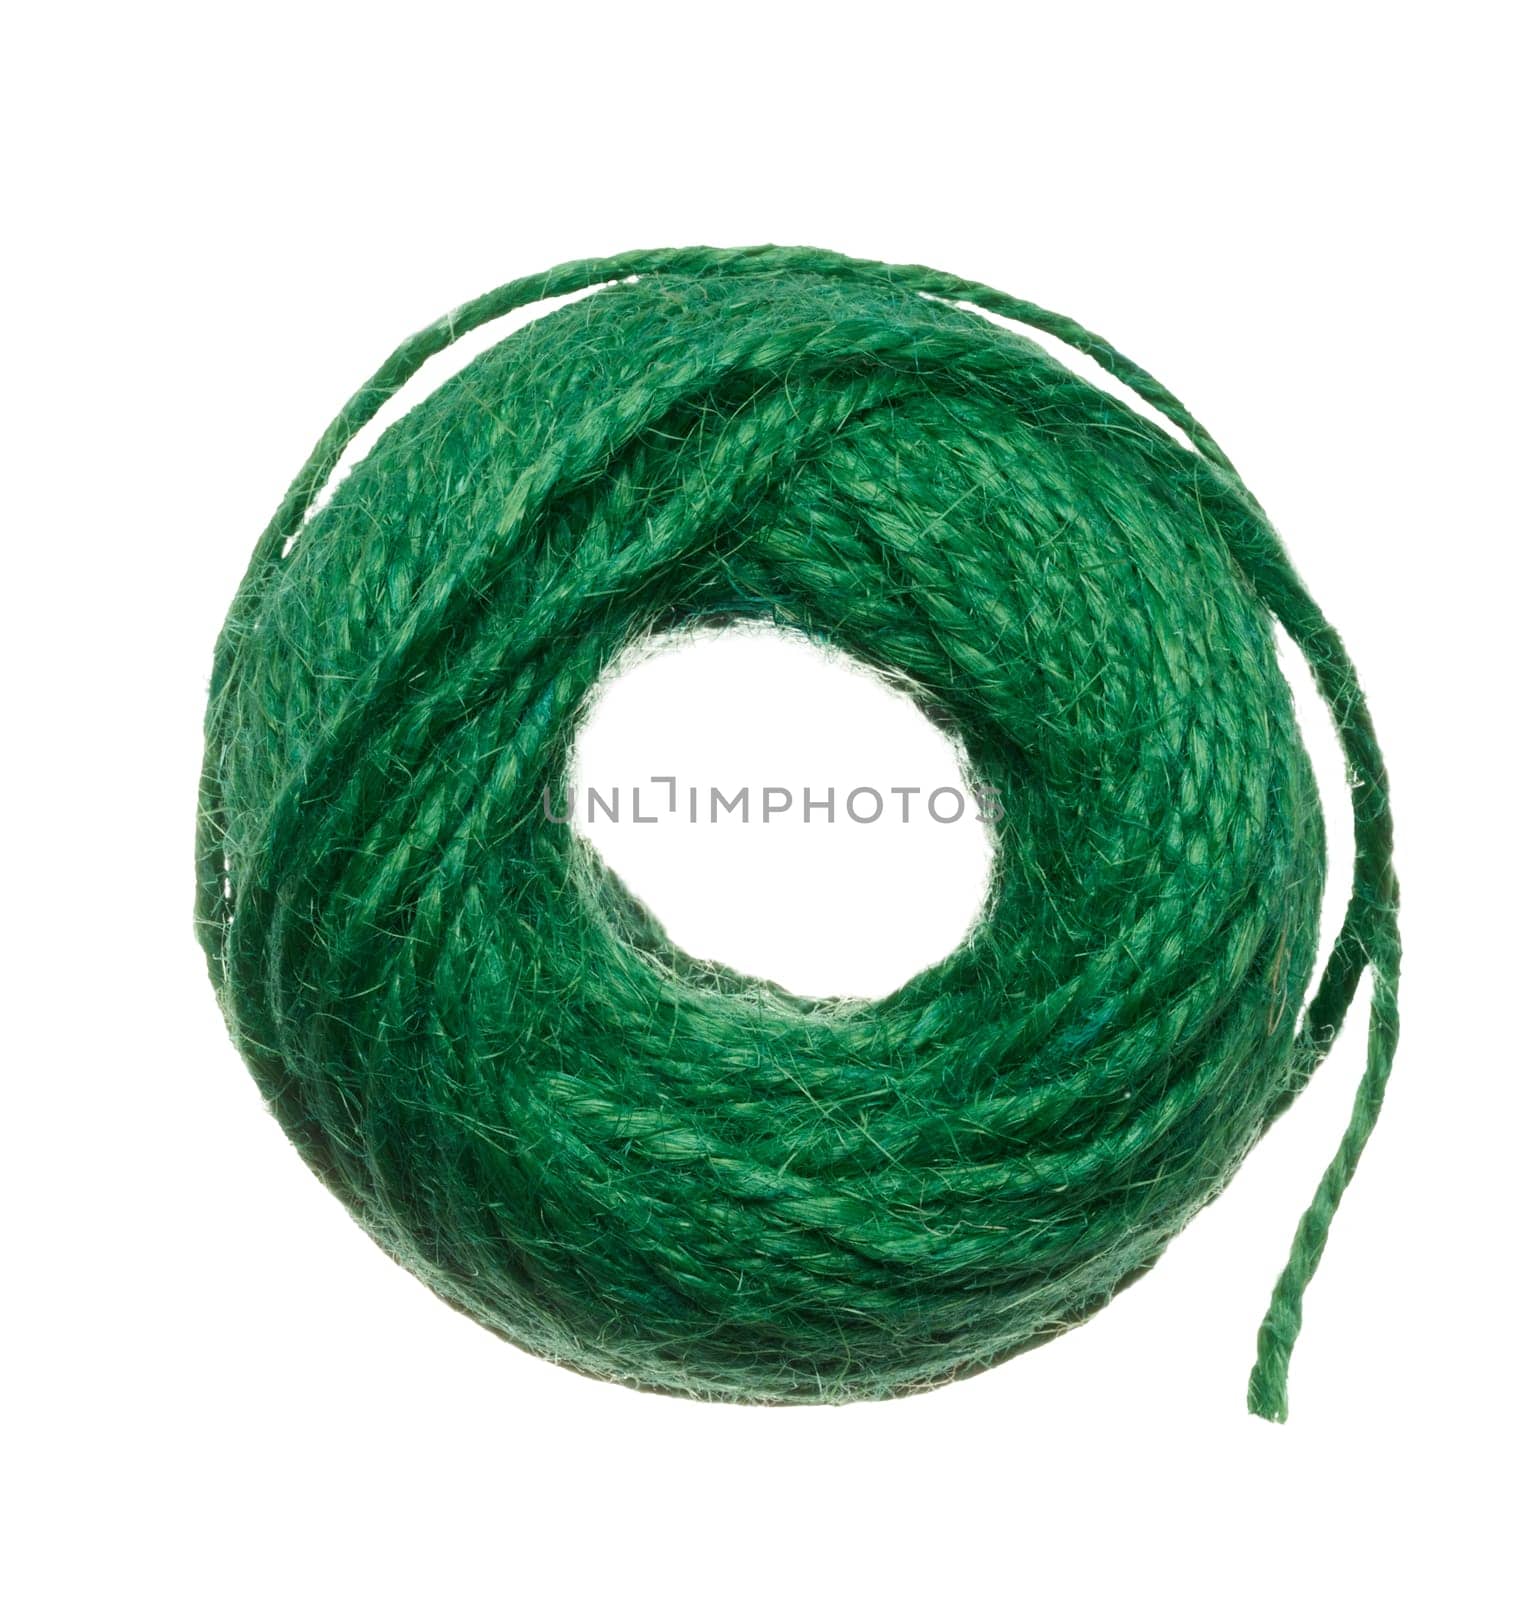 Skein of green thread on a white isolated background, top view